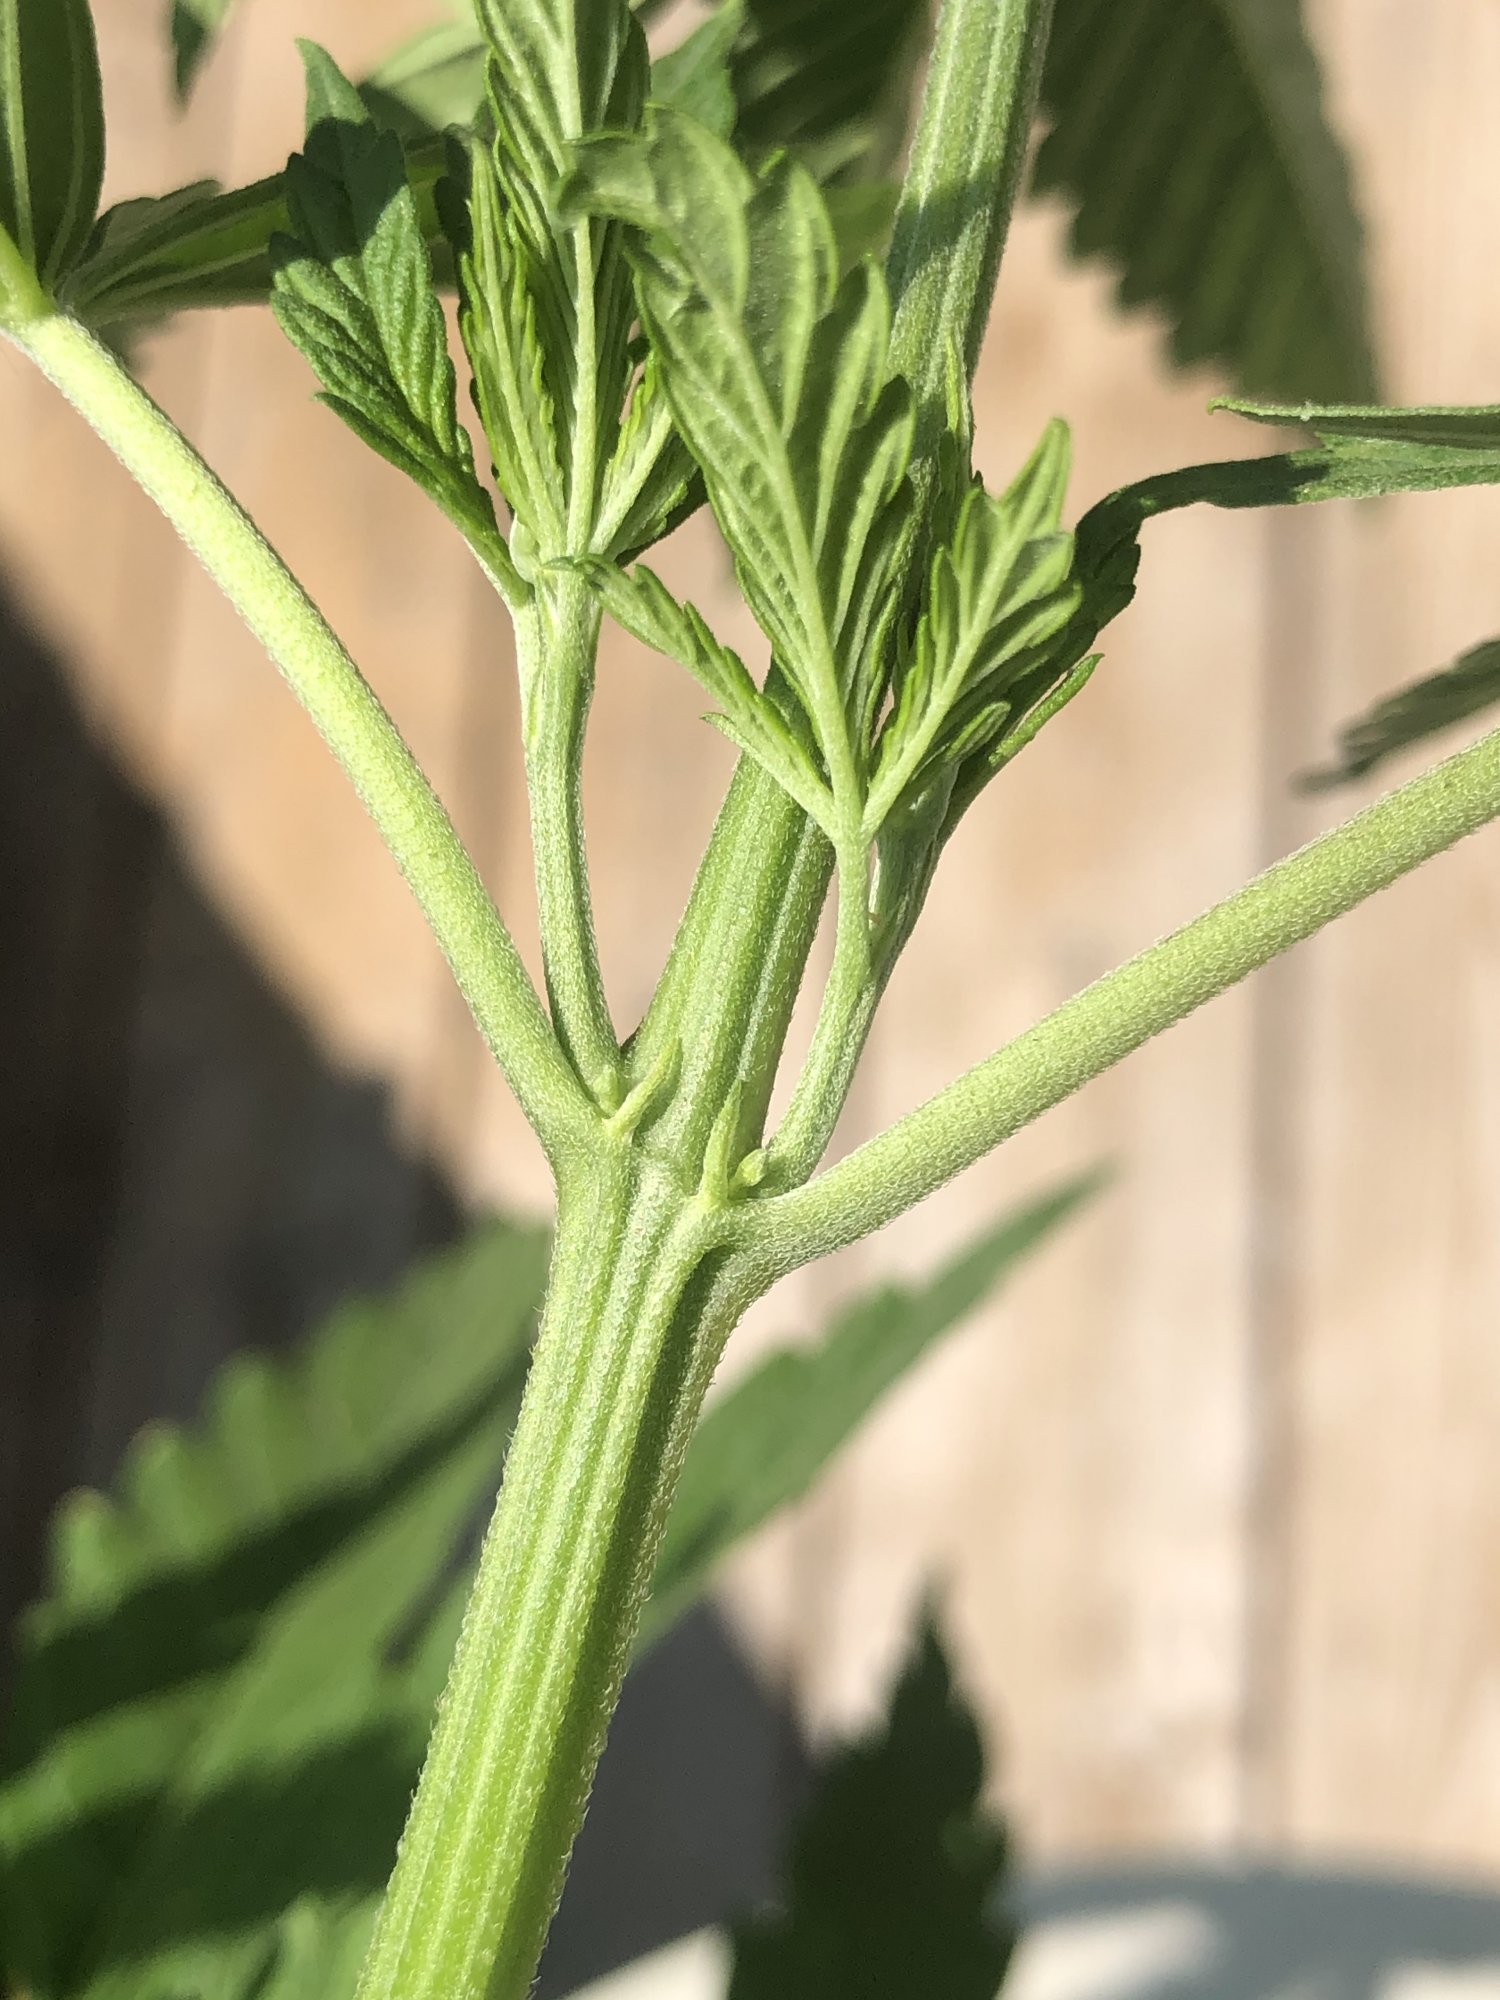 I need help determining sex and i think it might be ready 2